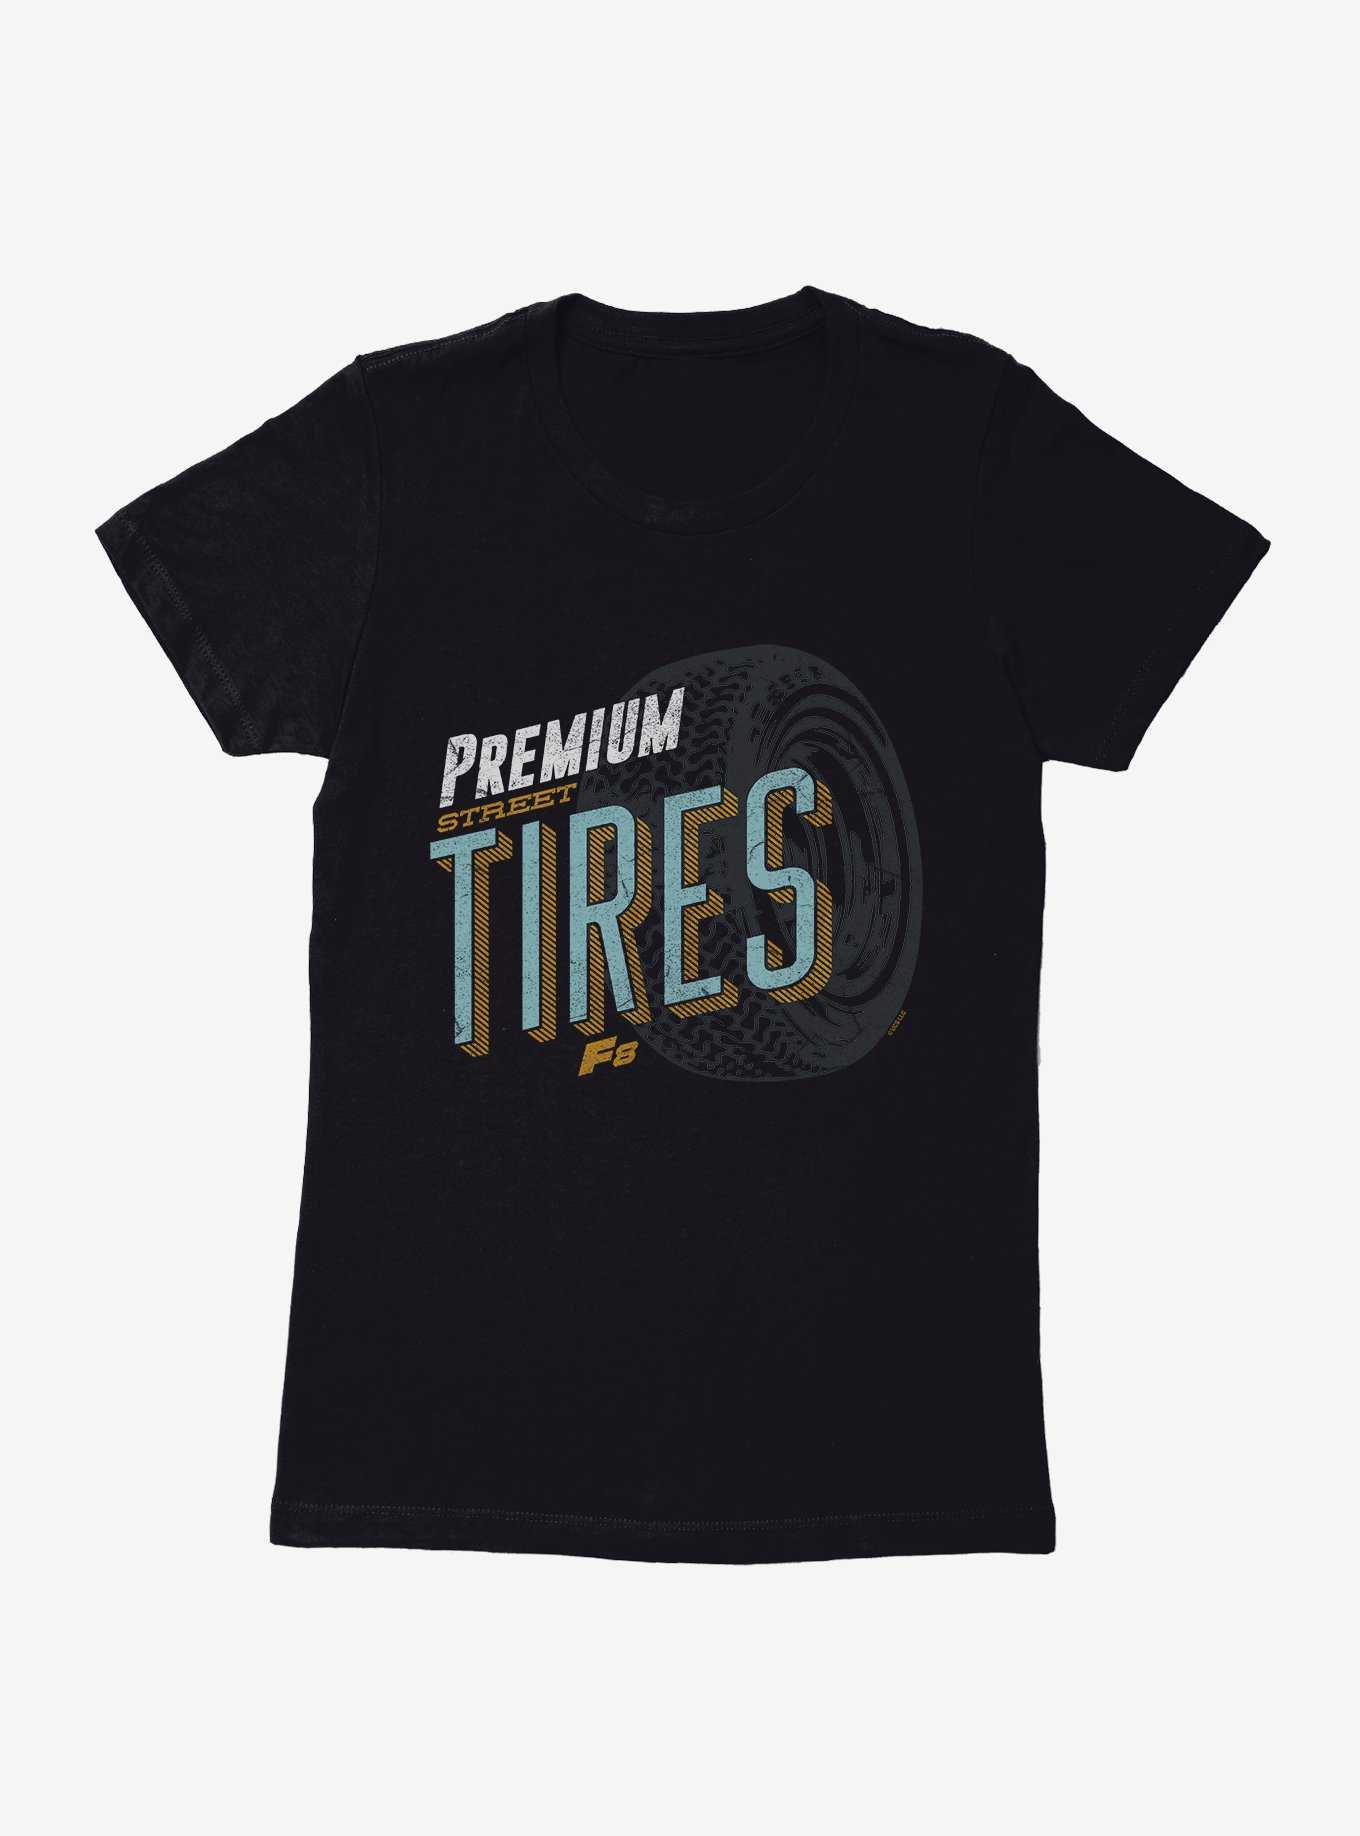 The Fate Of The Furious Premium Tires Womens T-Shirt, , hi-res